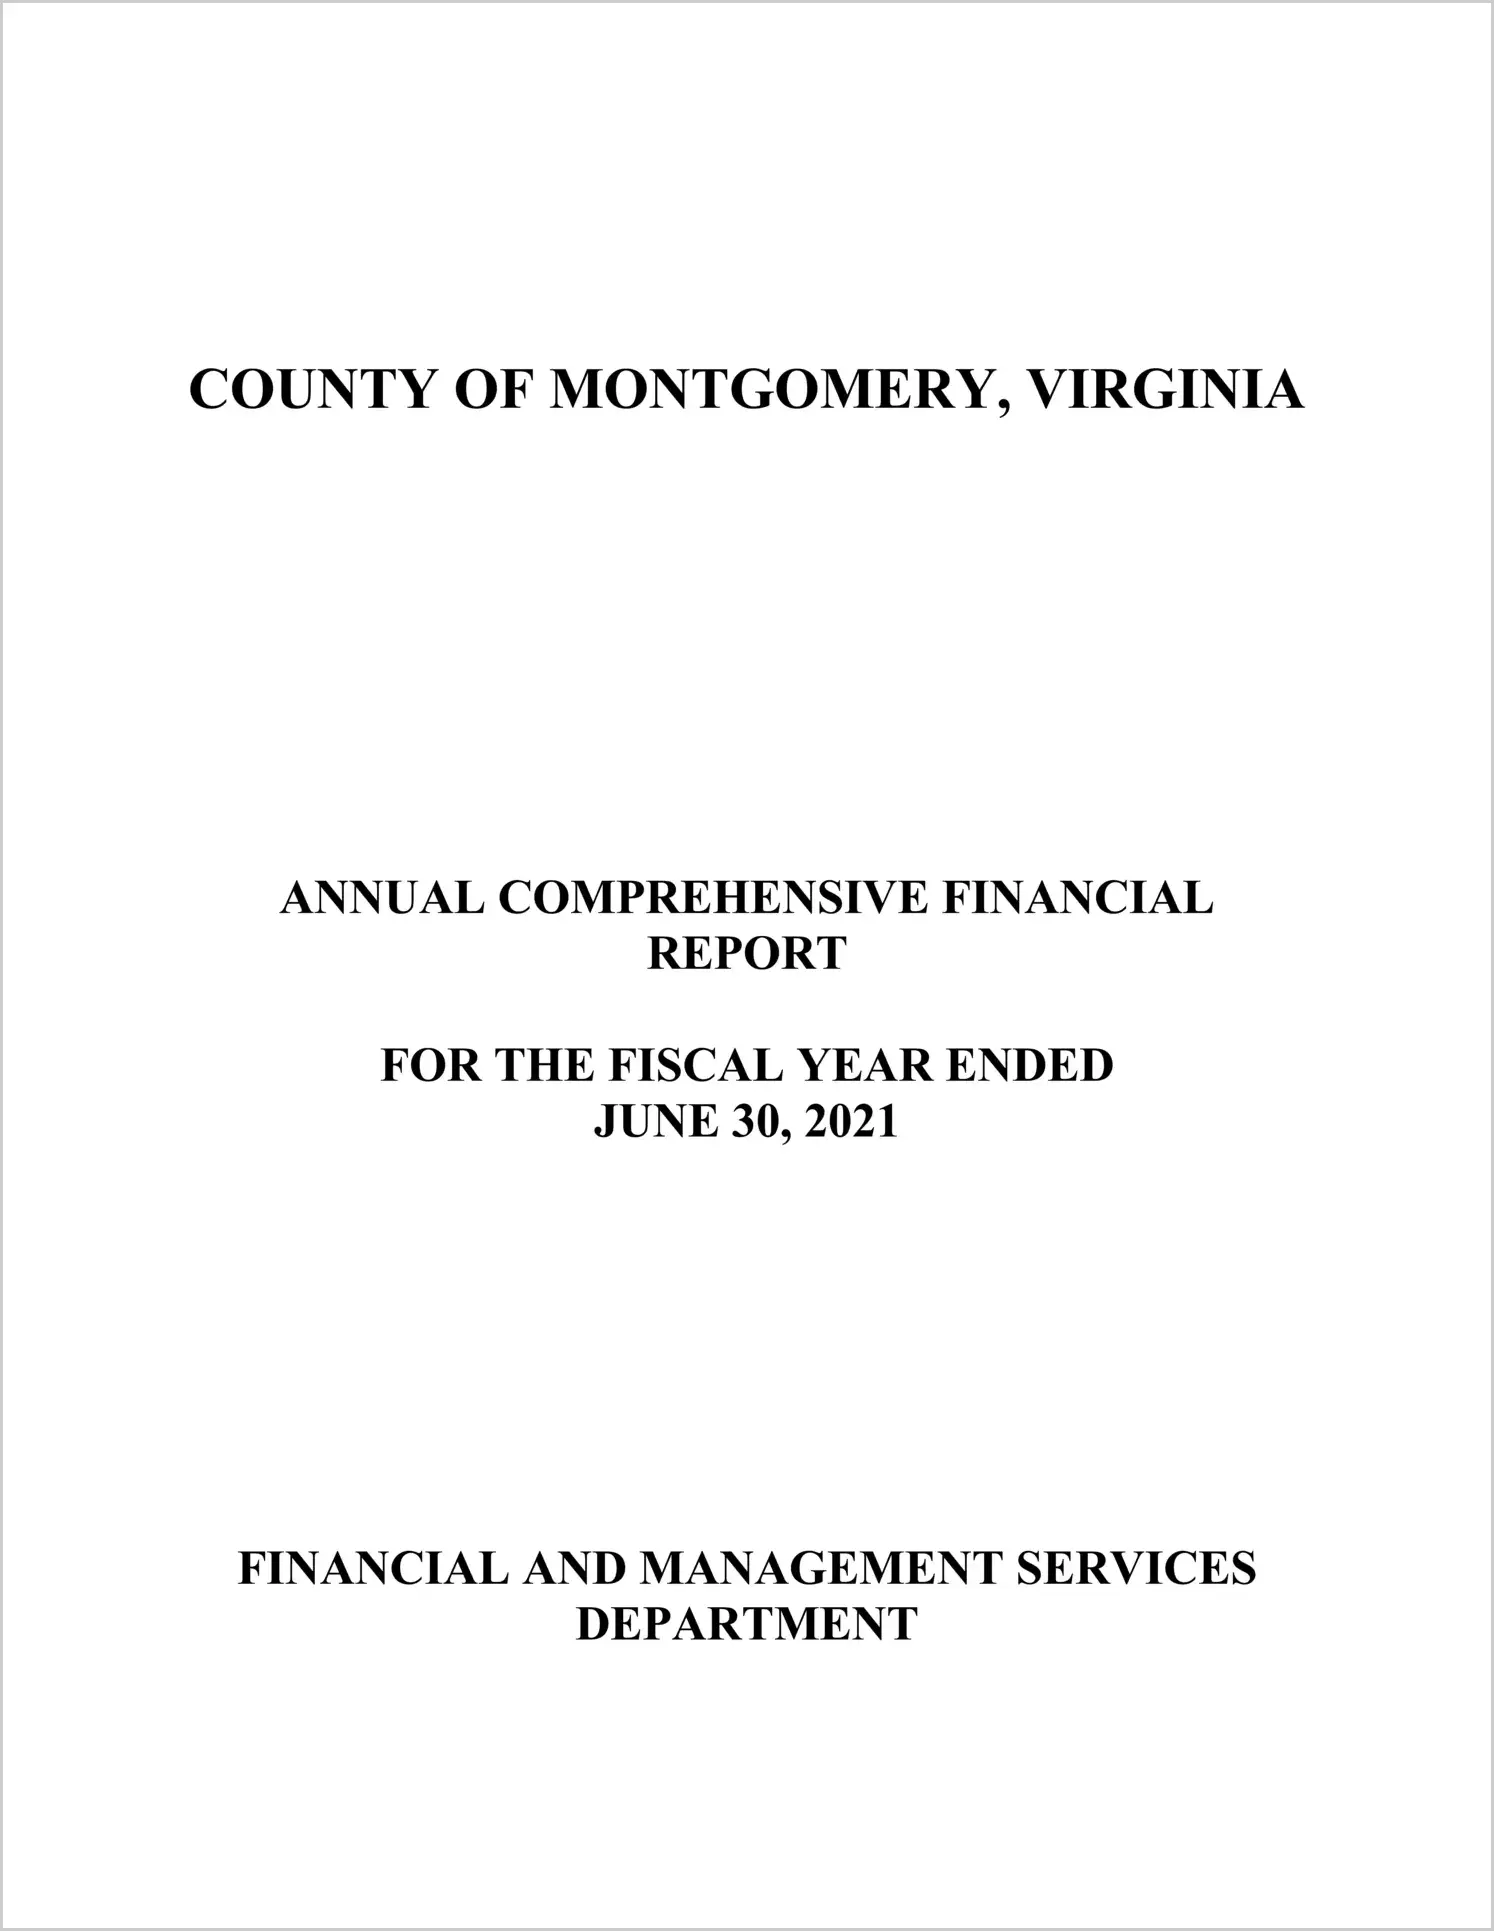 2021 Annual Financial Report for County of Montgomery